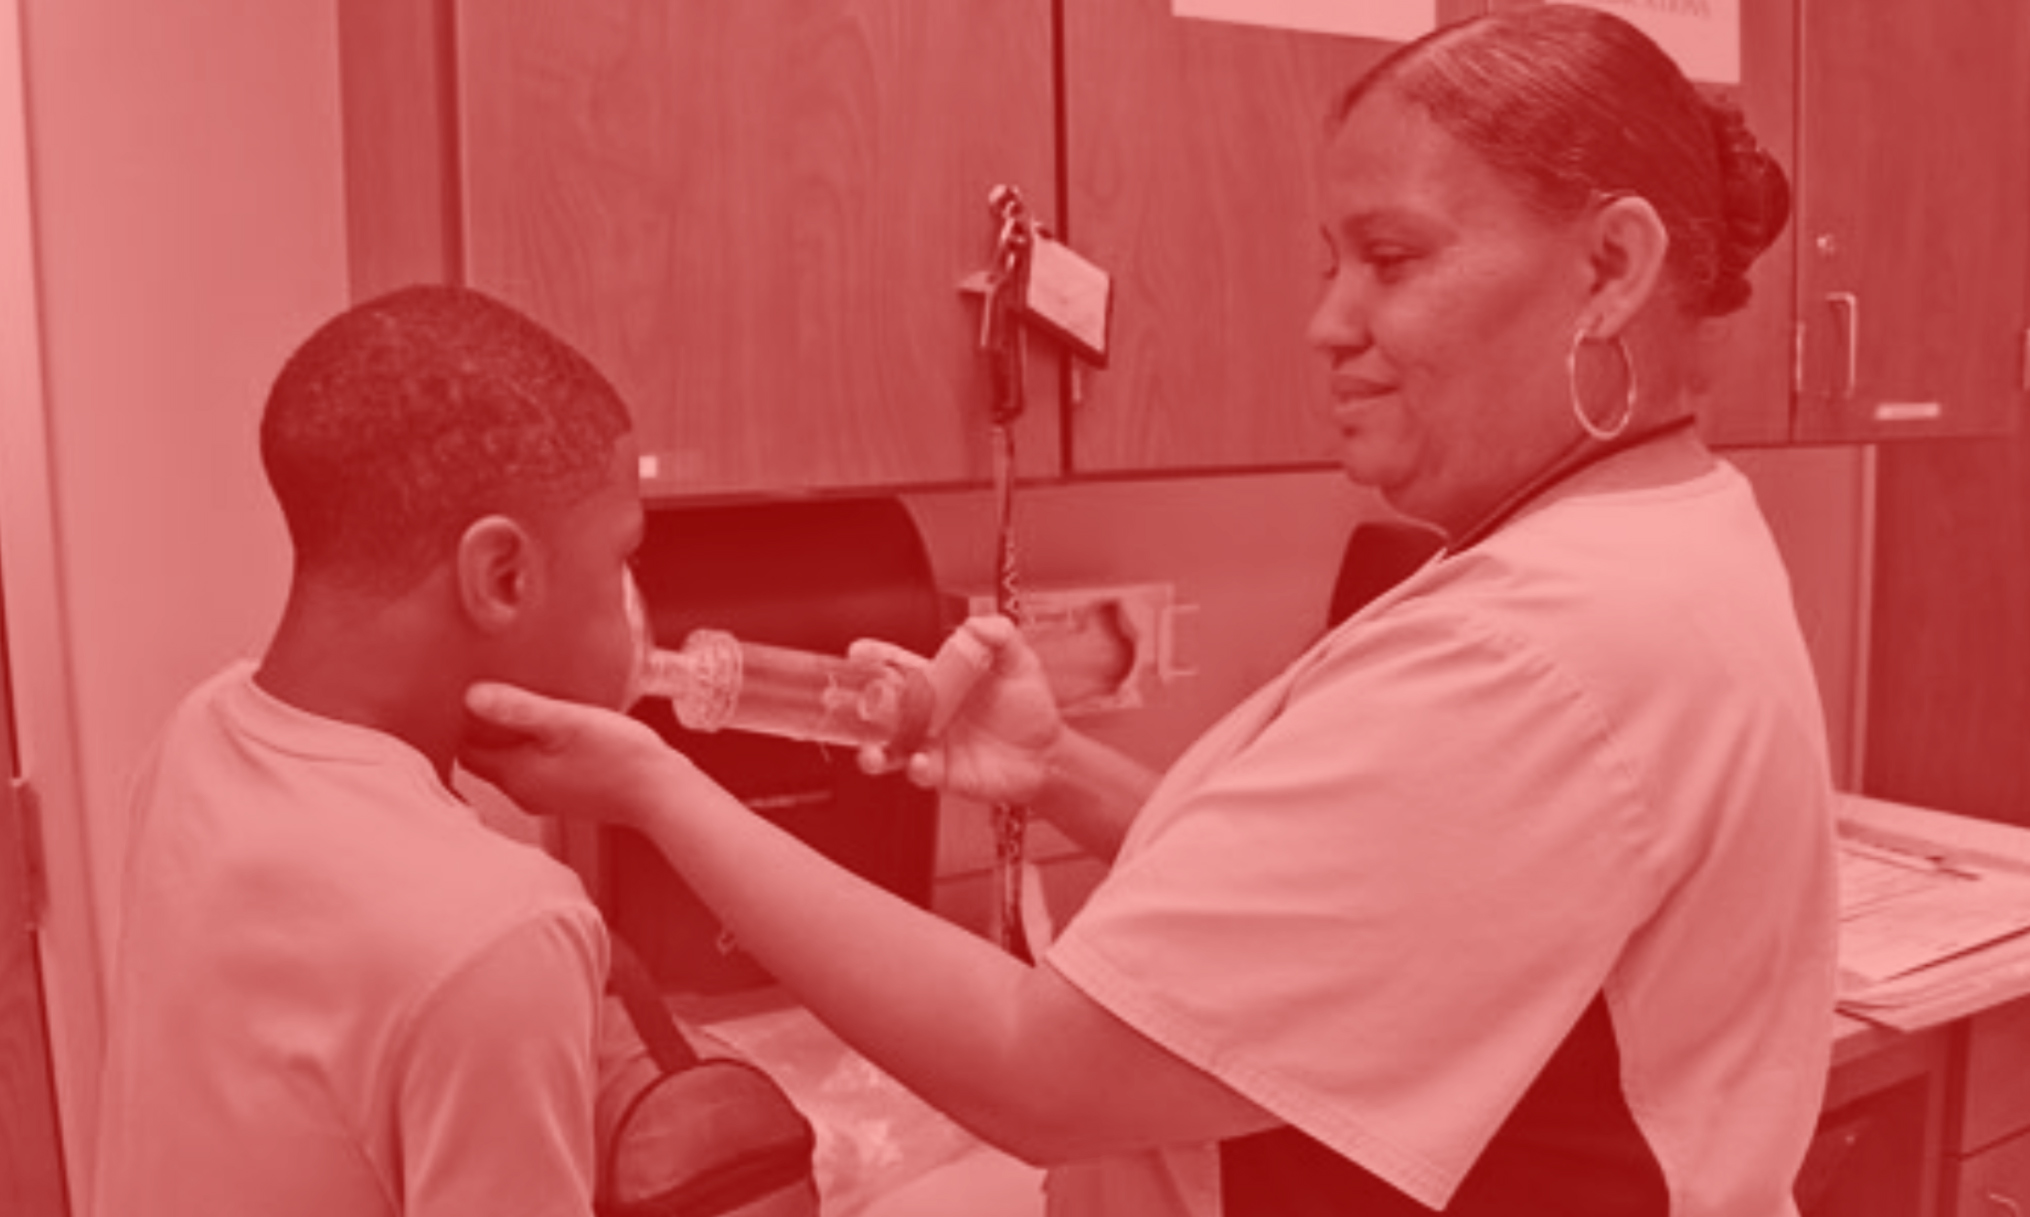 School-based asthma care with the Univerity of Rochester Medical Center